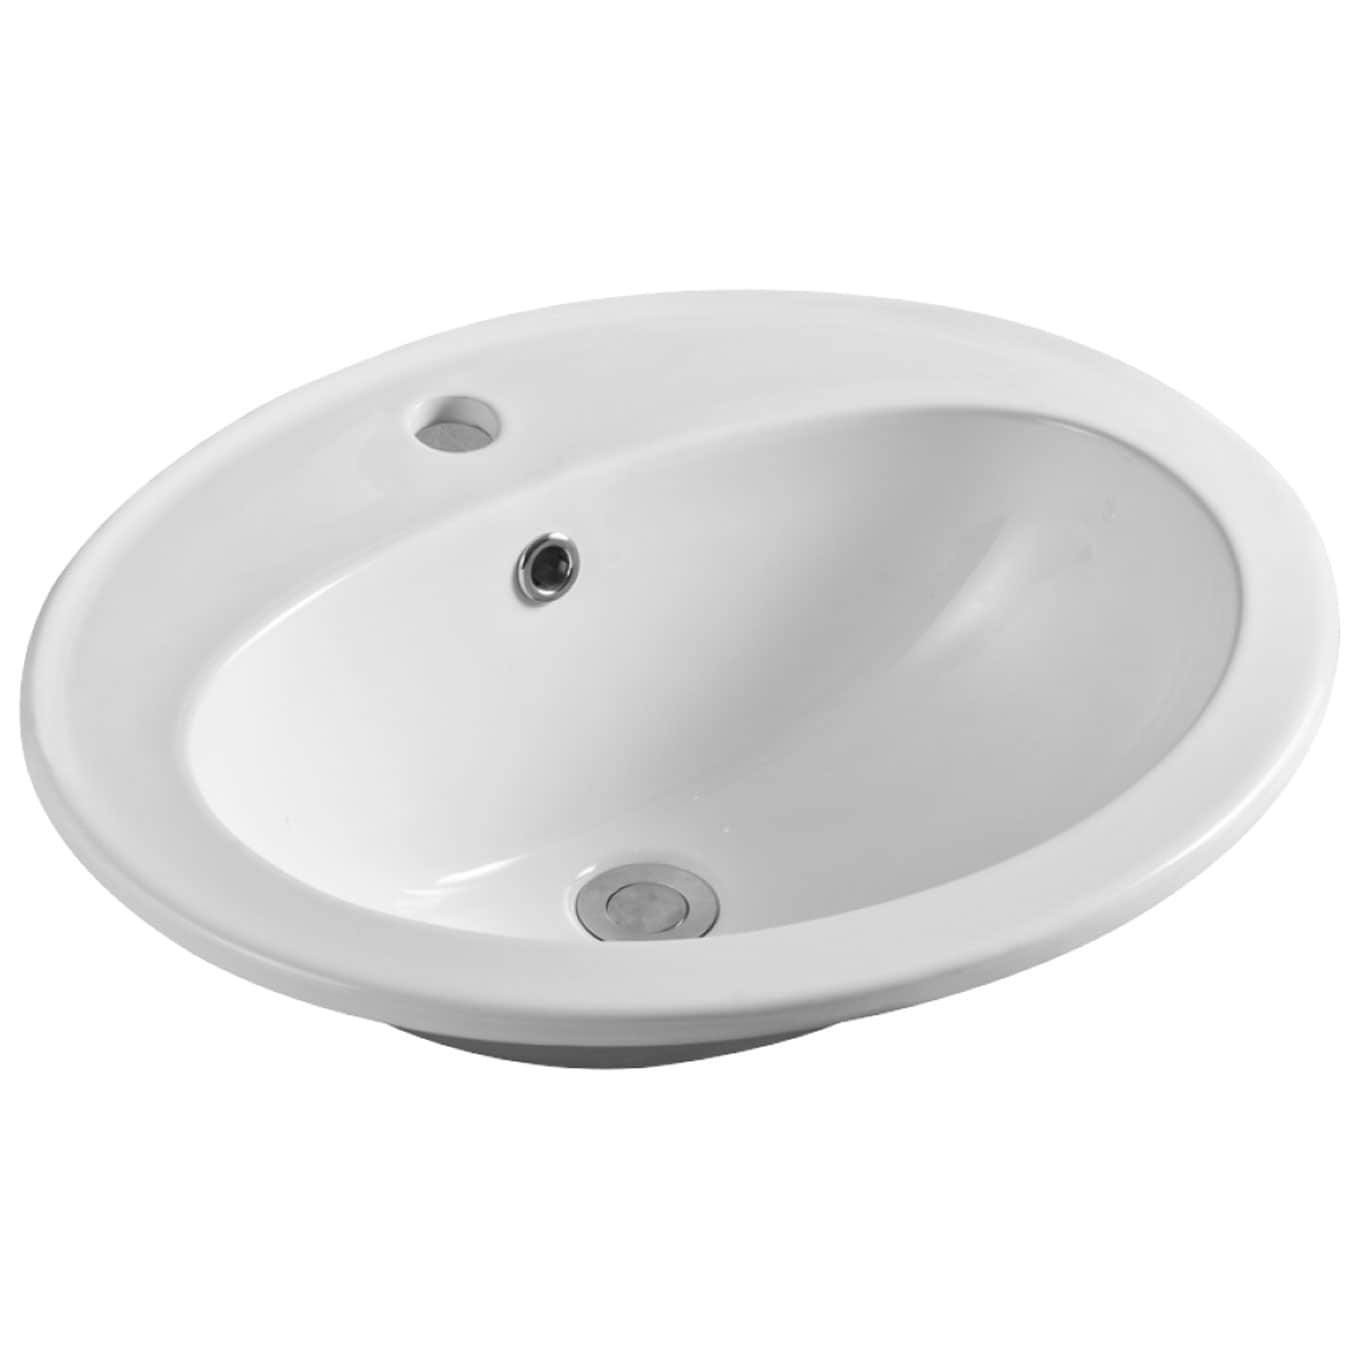 Lucy Fully-Inset Basin 565 x 480 x 210 mm – Infinity Plus Bathrooms